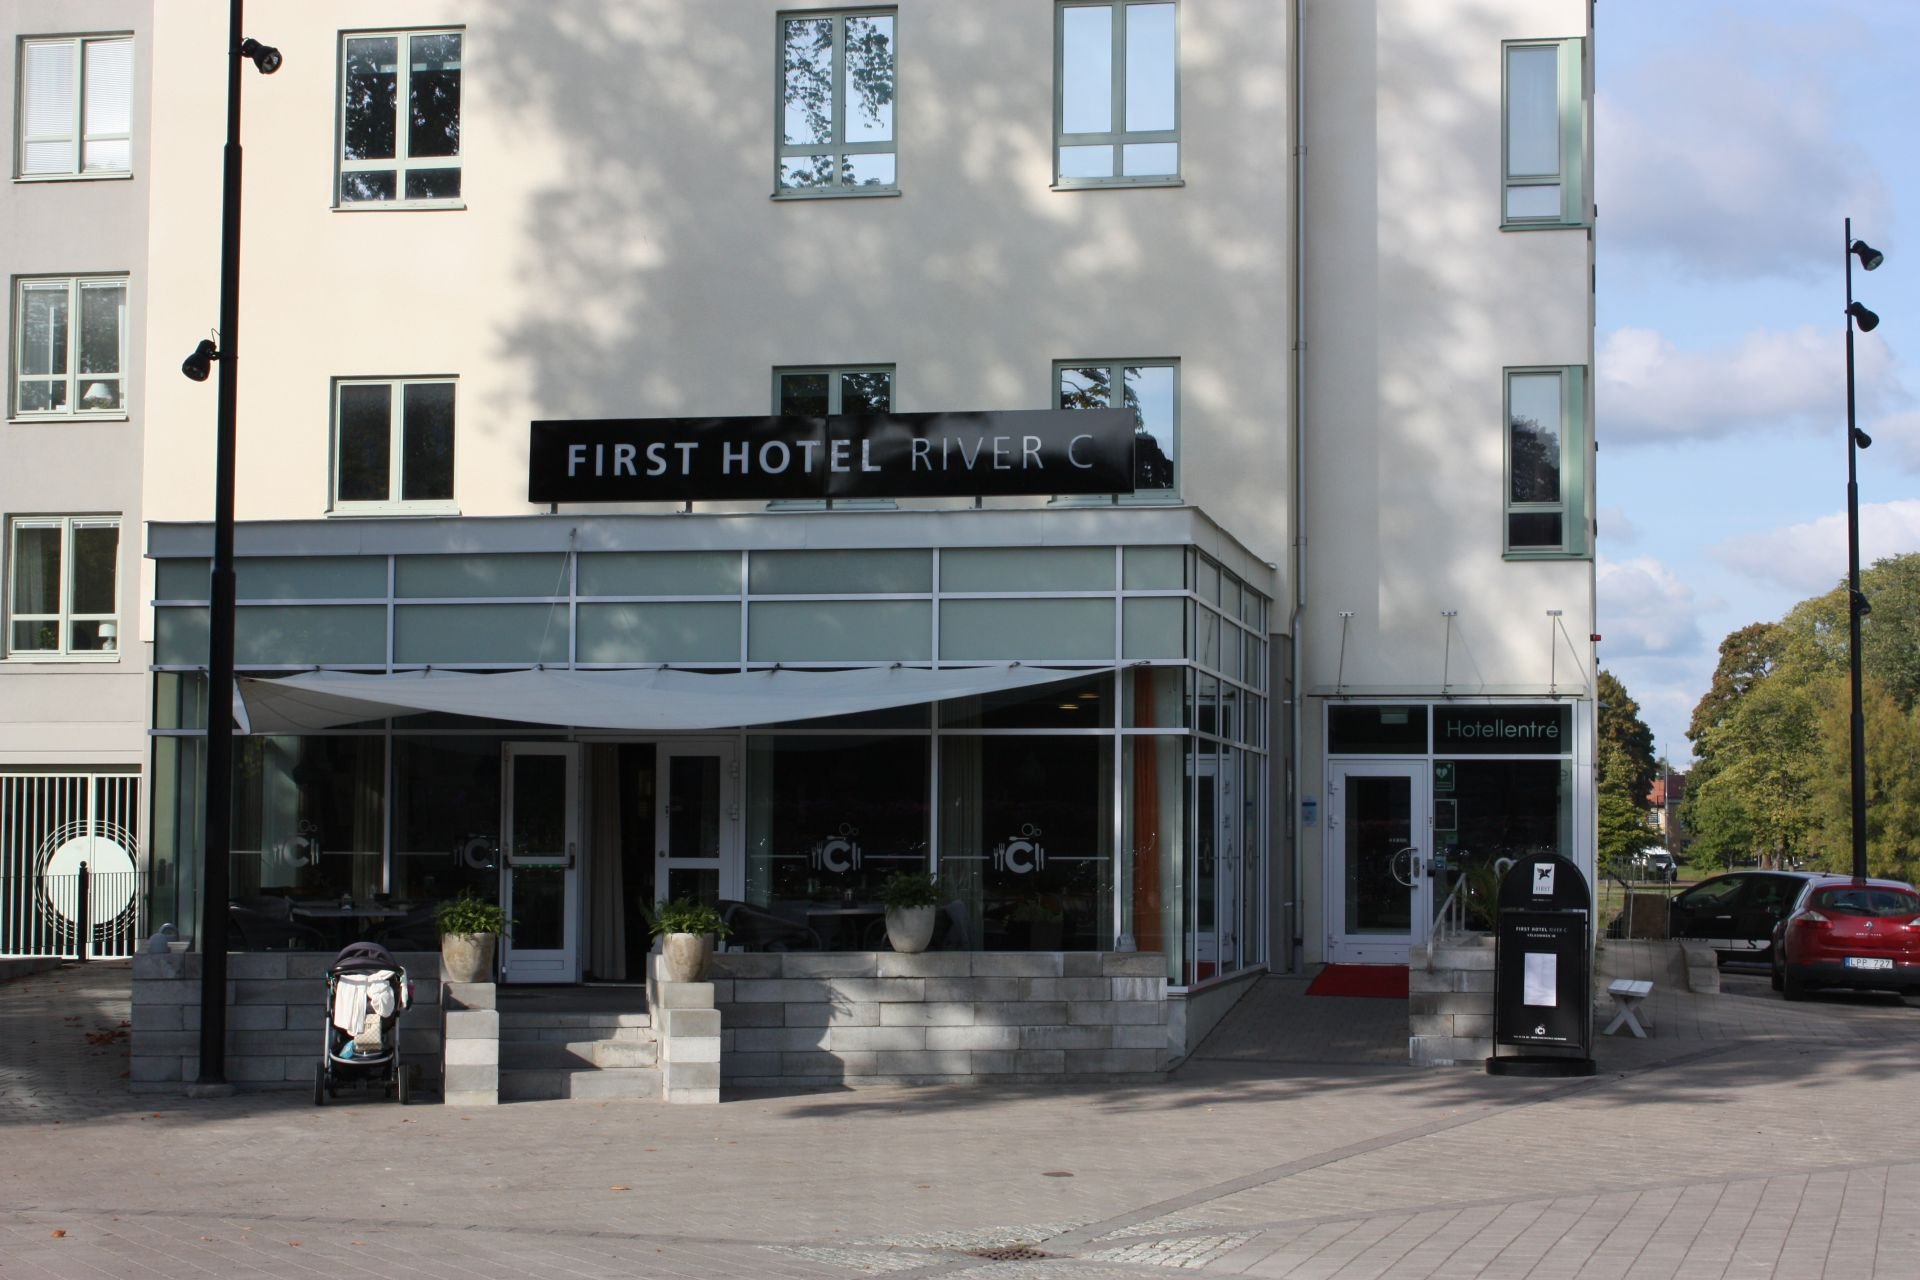 First Hotel River C